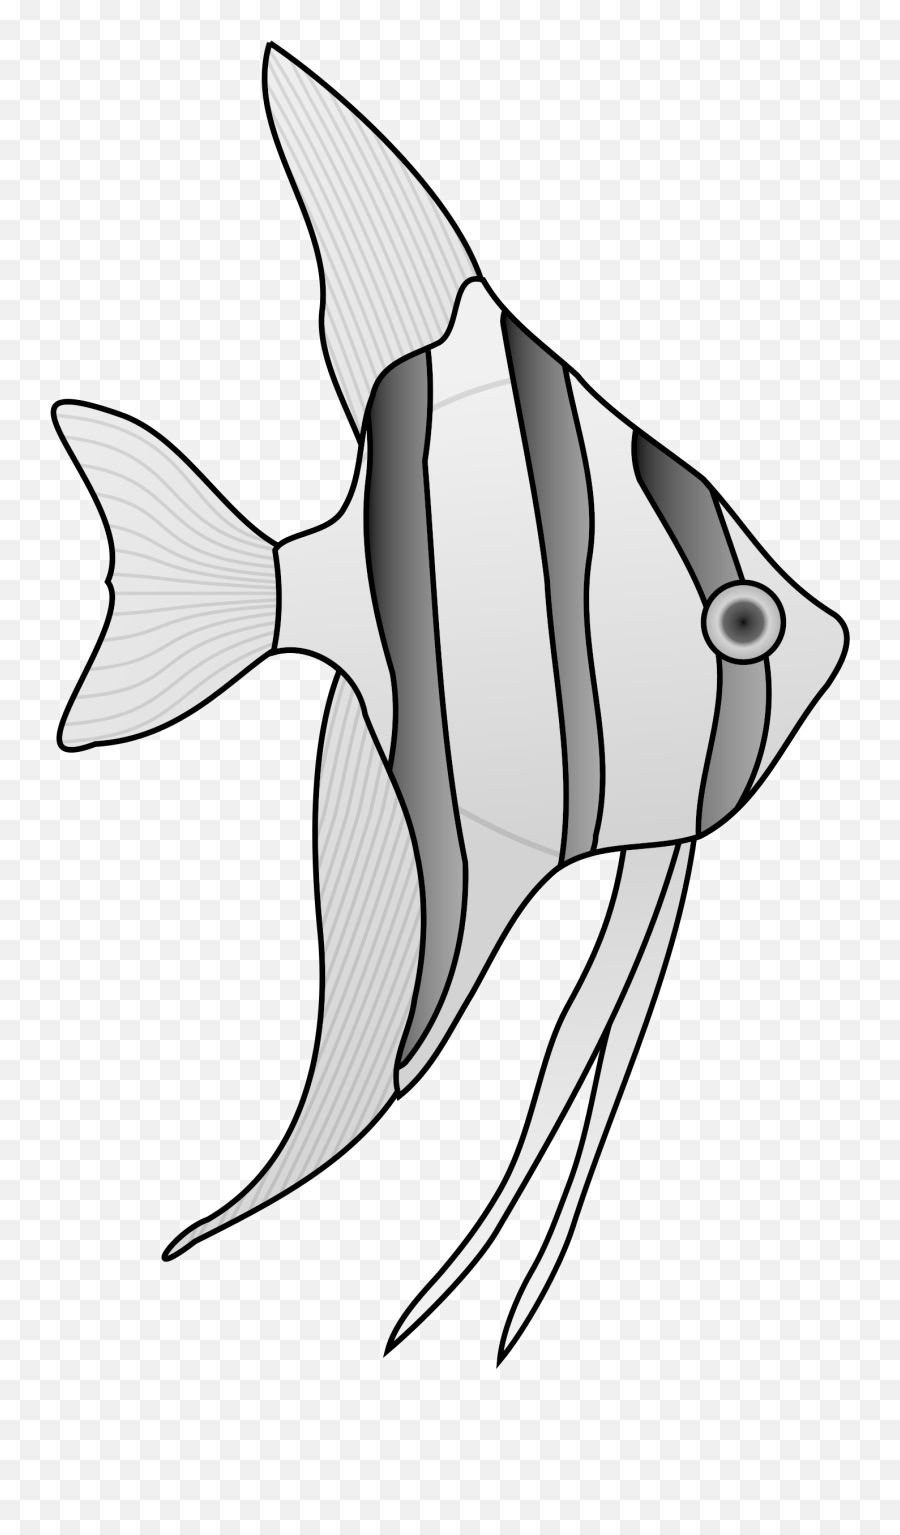 Sfcp32 Striped Fish Clipart Png Big Pictures Hd 4570book - Draw An Angel Fish,Fish Outline Png